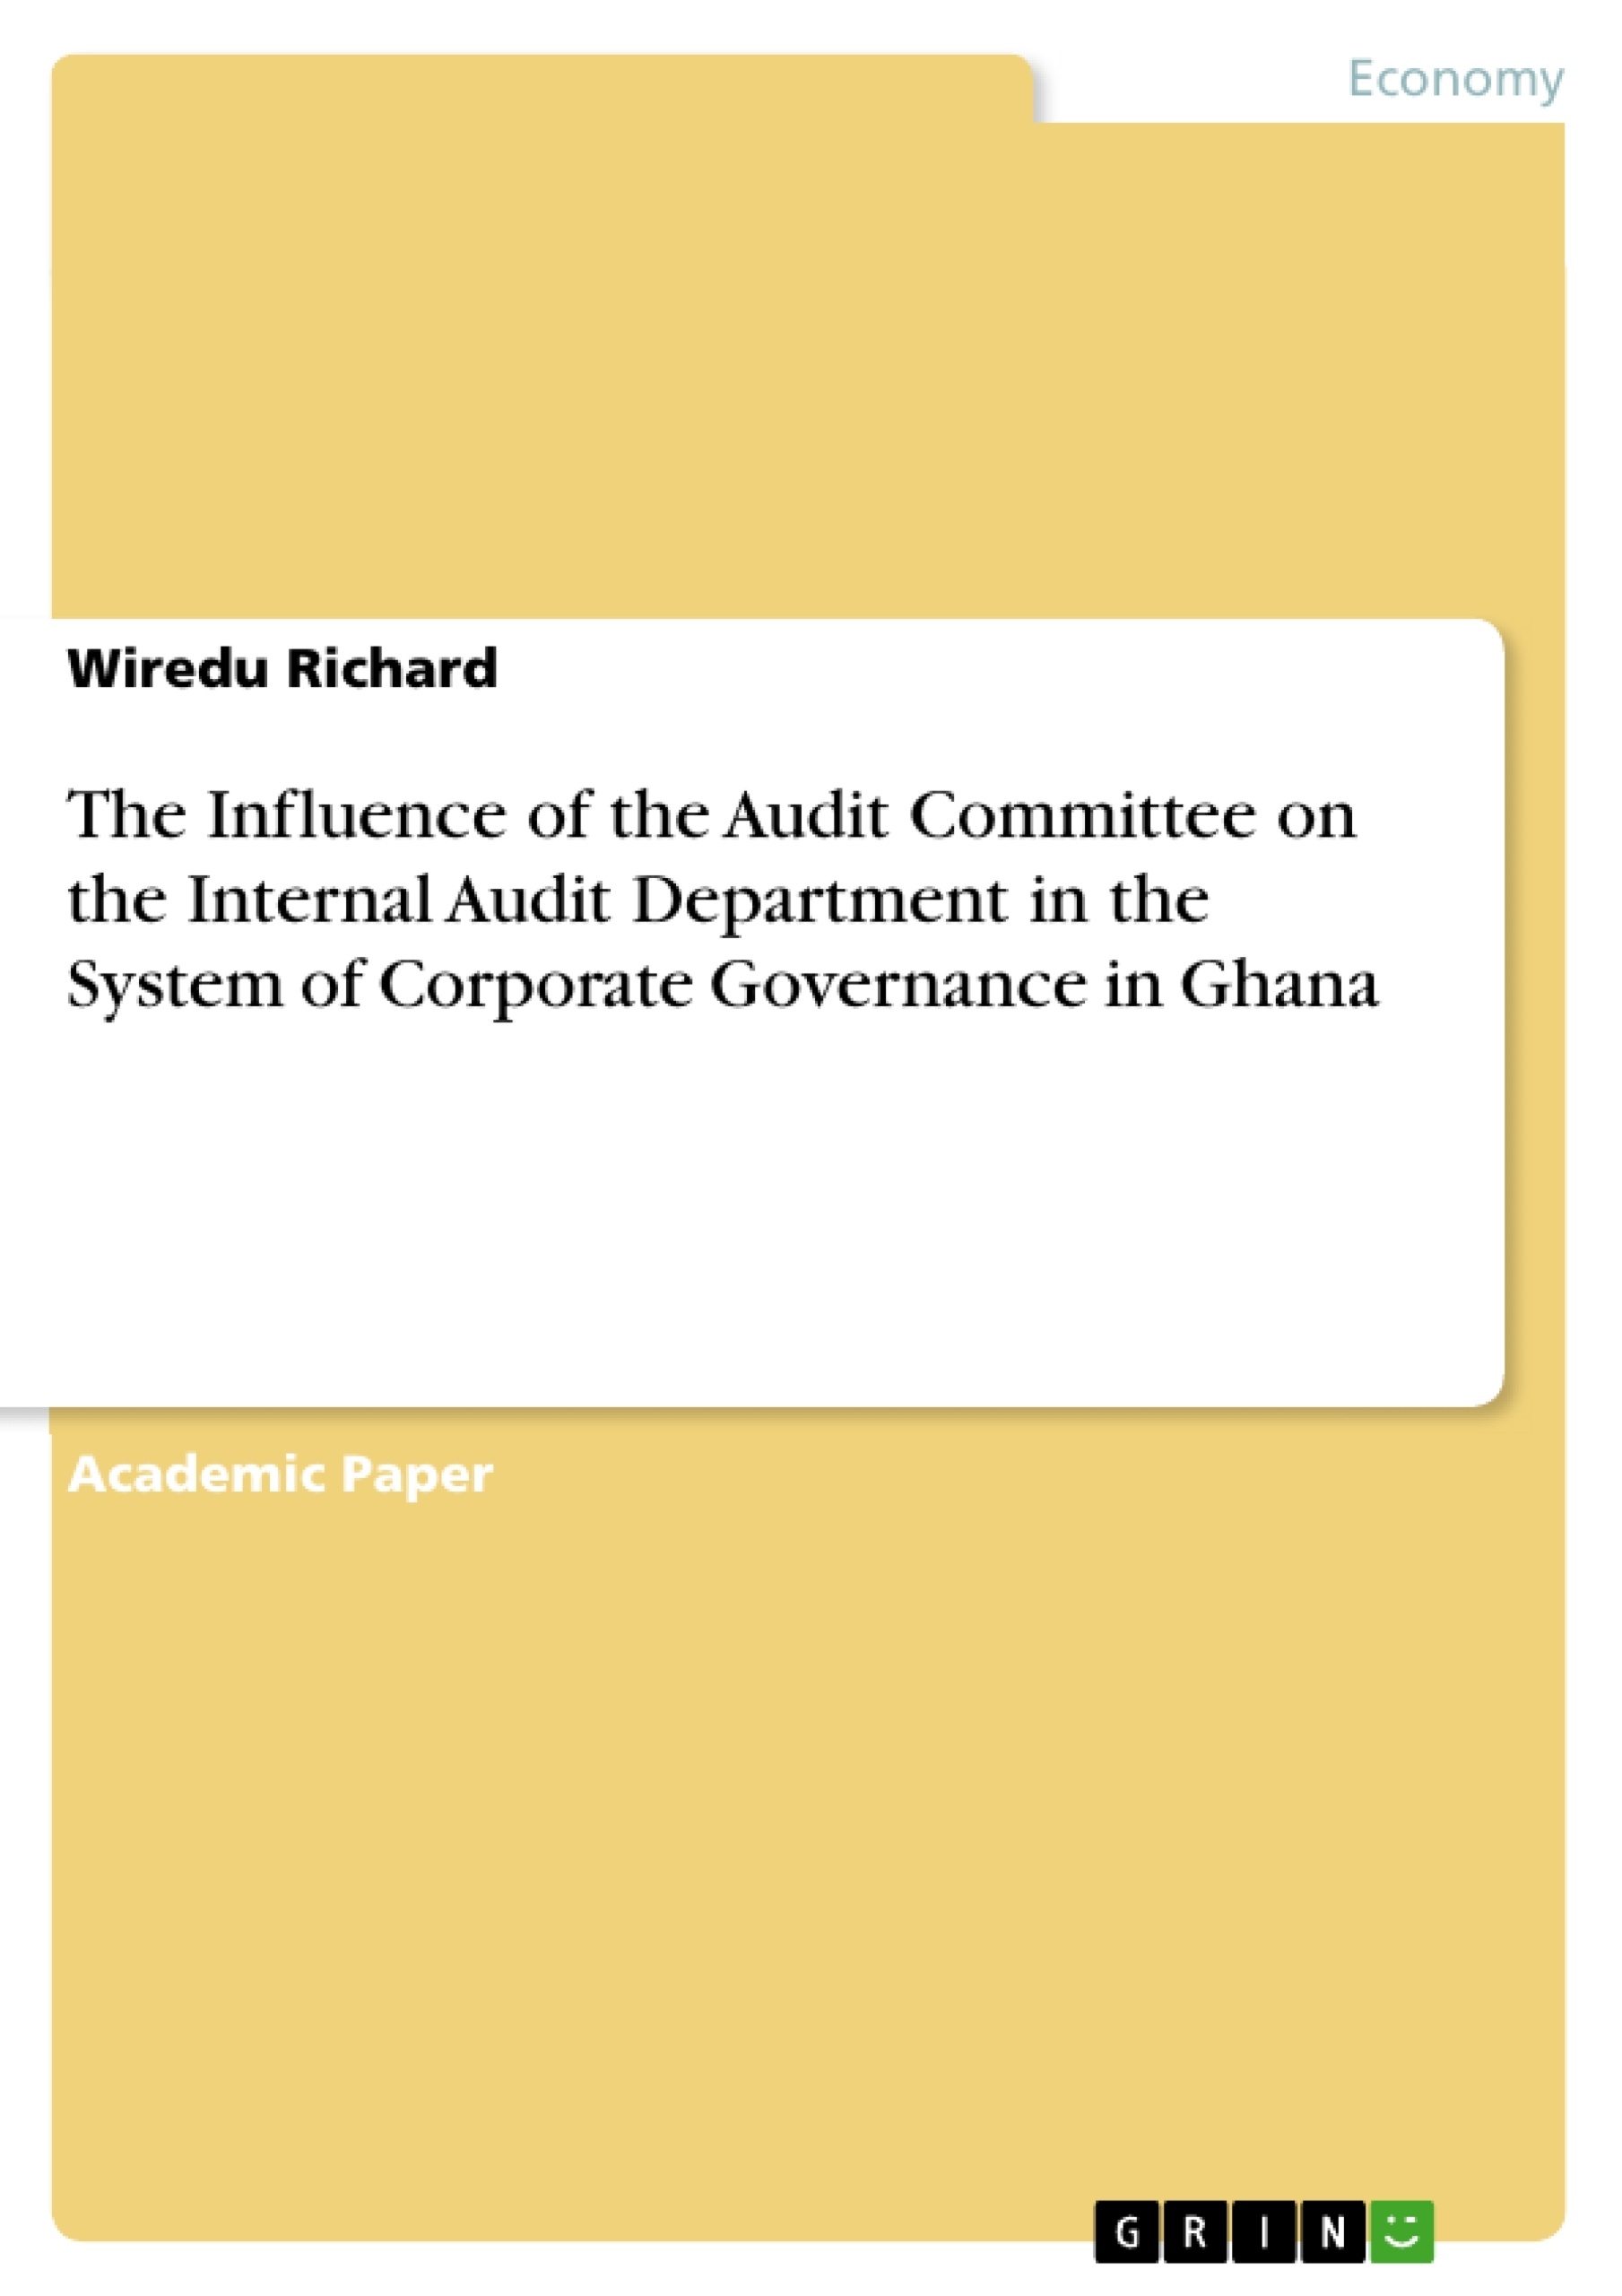 Title: The Influence of the Audit Committee on the Internal Audit Department in the System of Corporate Governance in Ghana